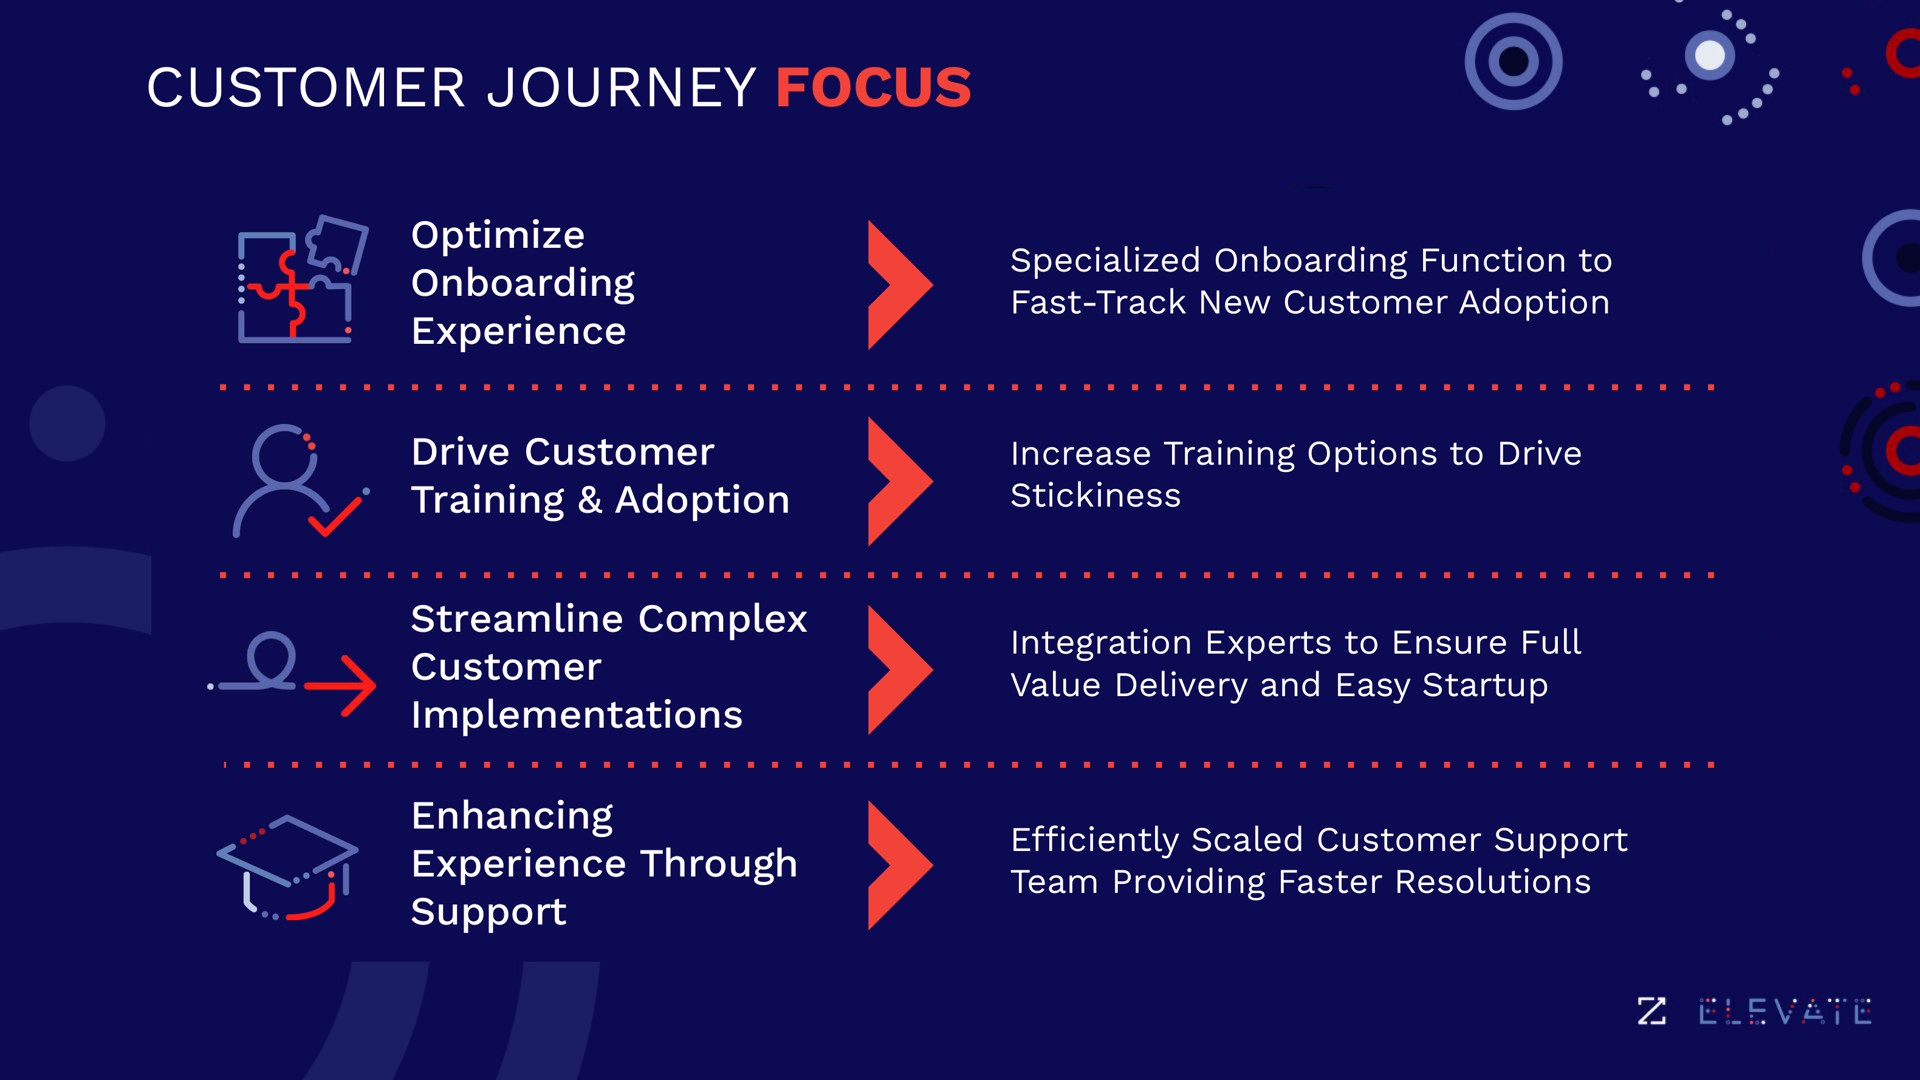 customer journey focus as experience specialized function to fast track new adoption drive training adoption increase training options to drive stickiness implementations shi integration experts to ensure full value delivery and easy feu efficiently scaled support team providing faster resolutions i | Zoominfo